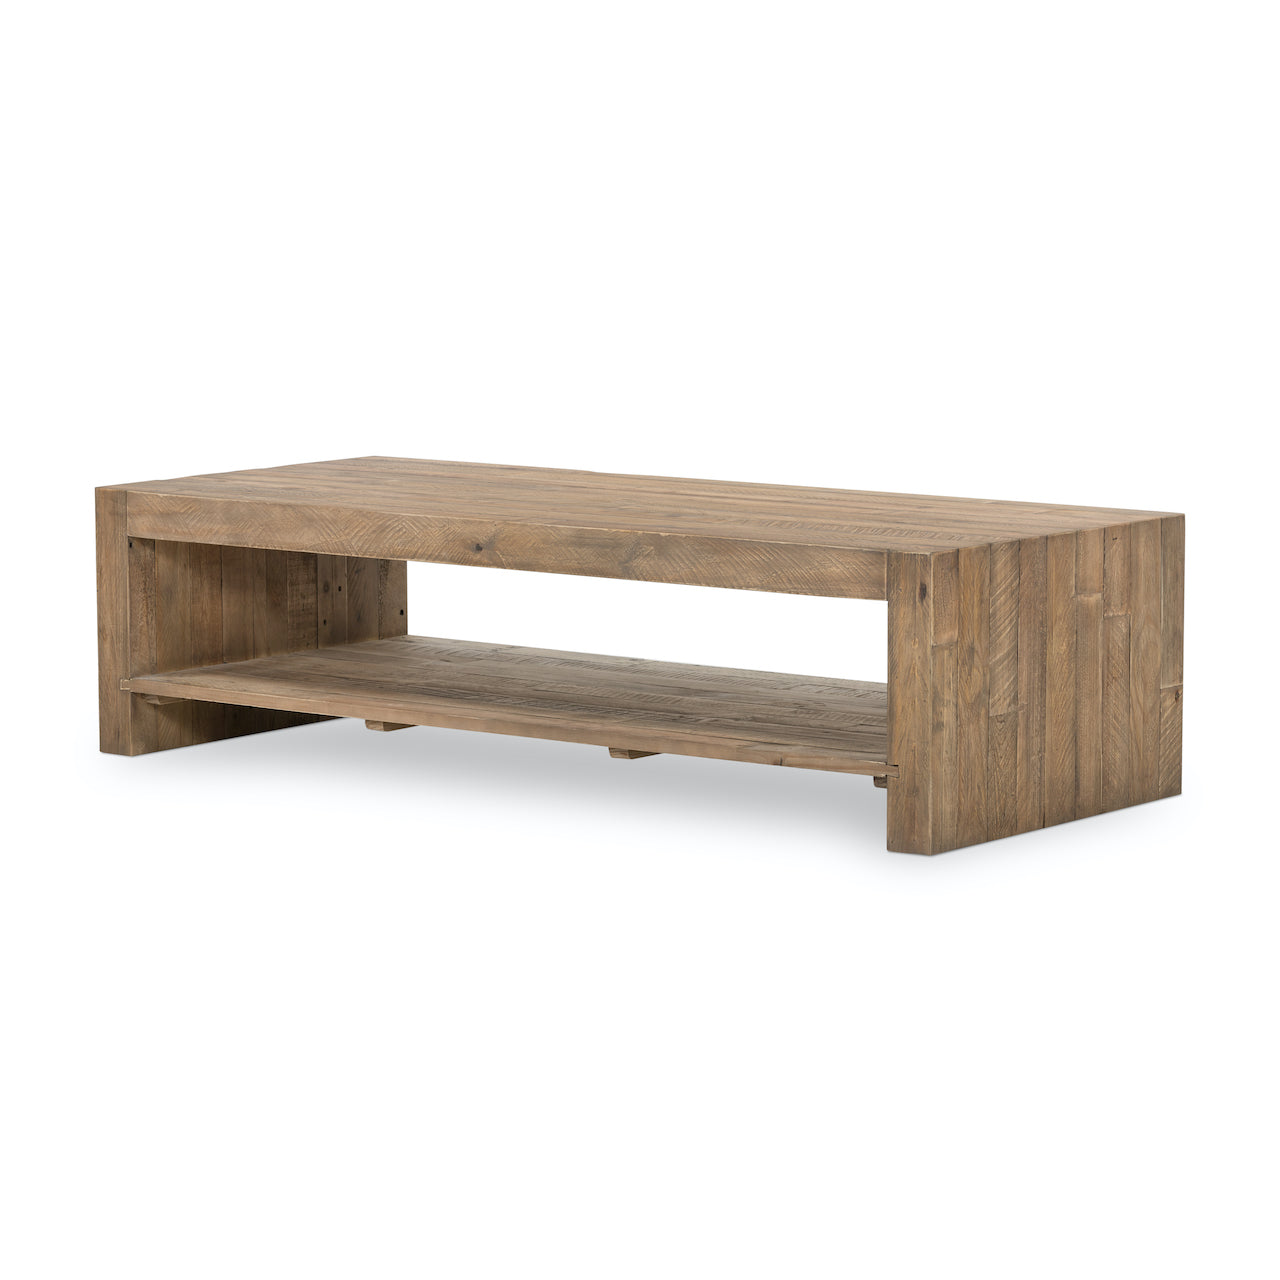 Beckette Coffee Table